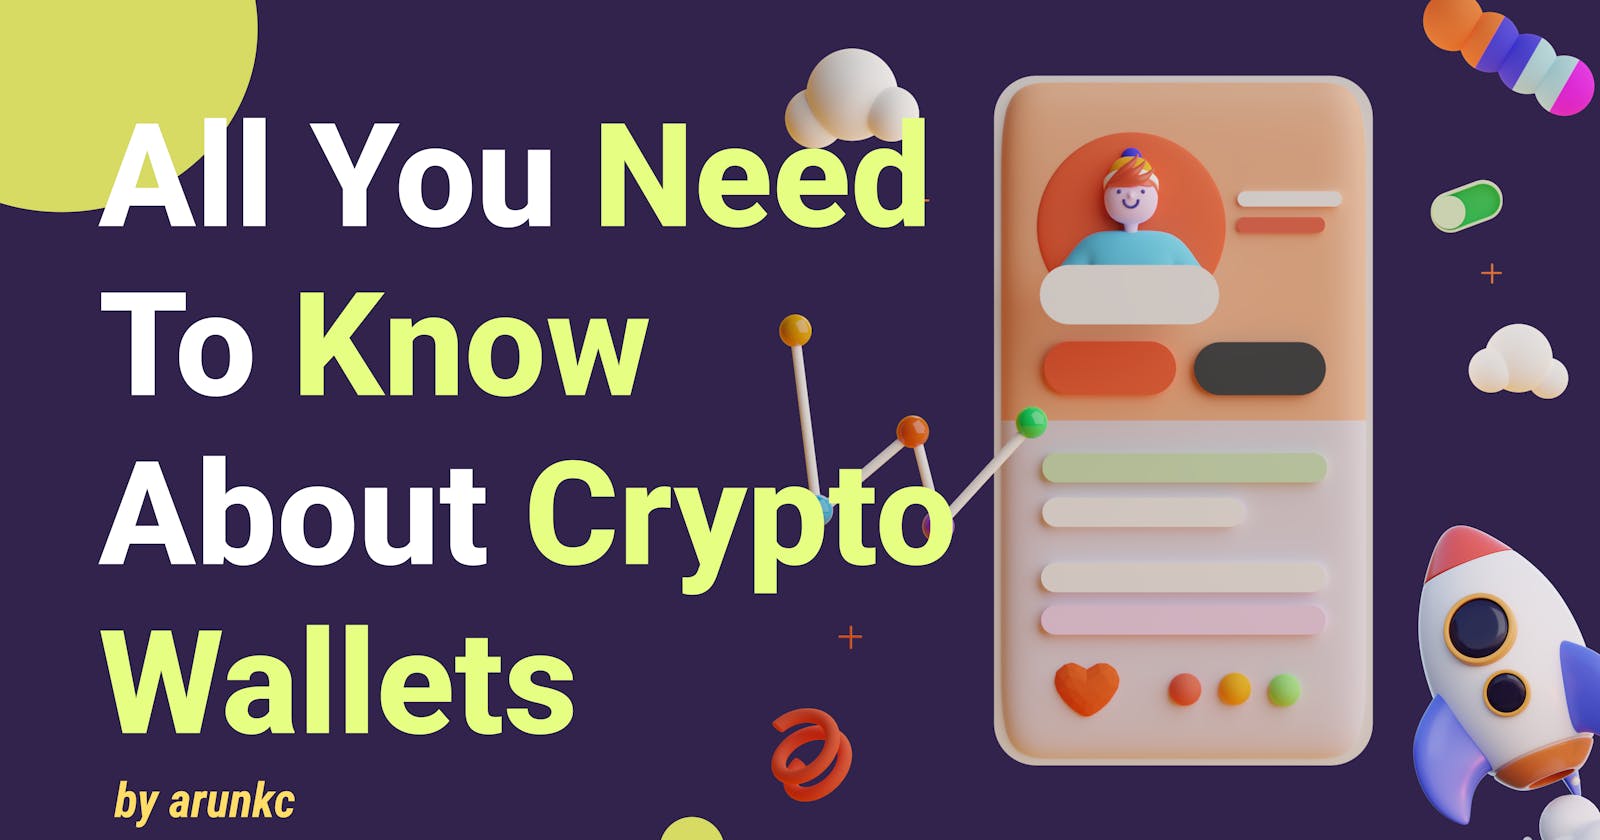 All You Need To Know About Crypto Wallets